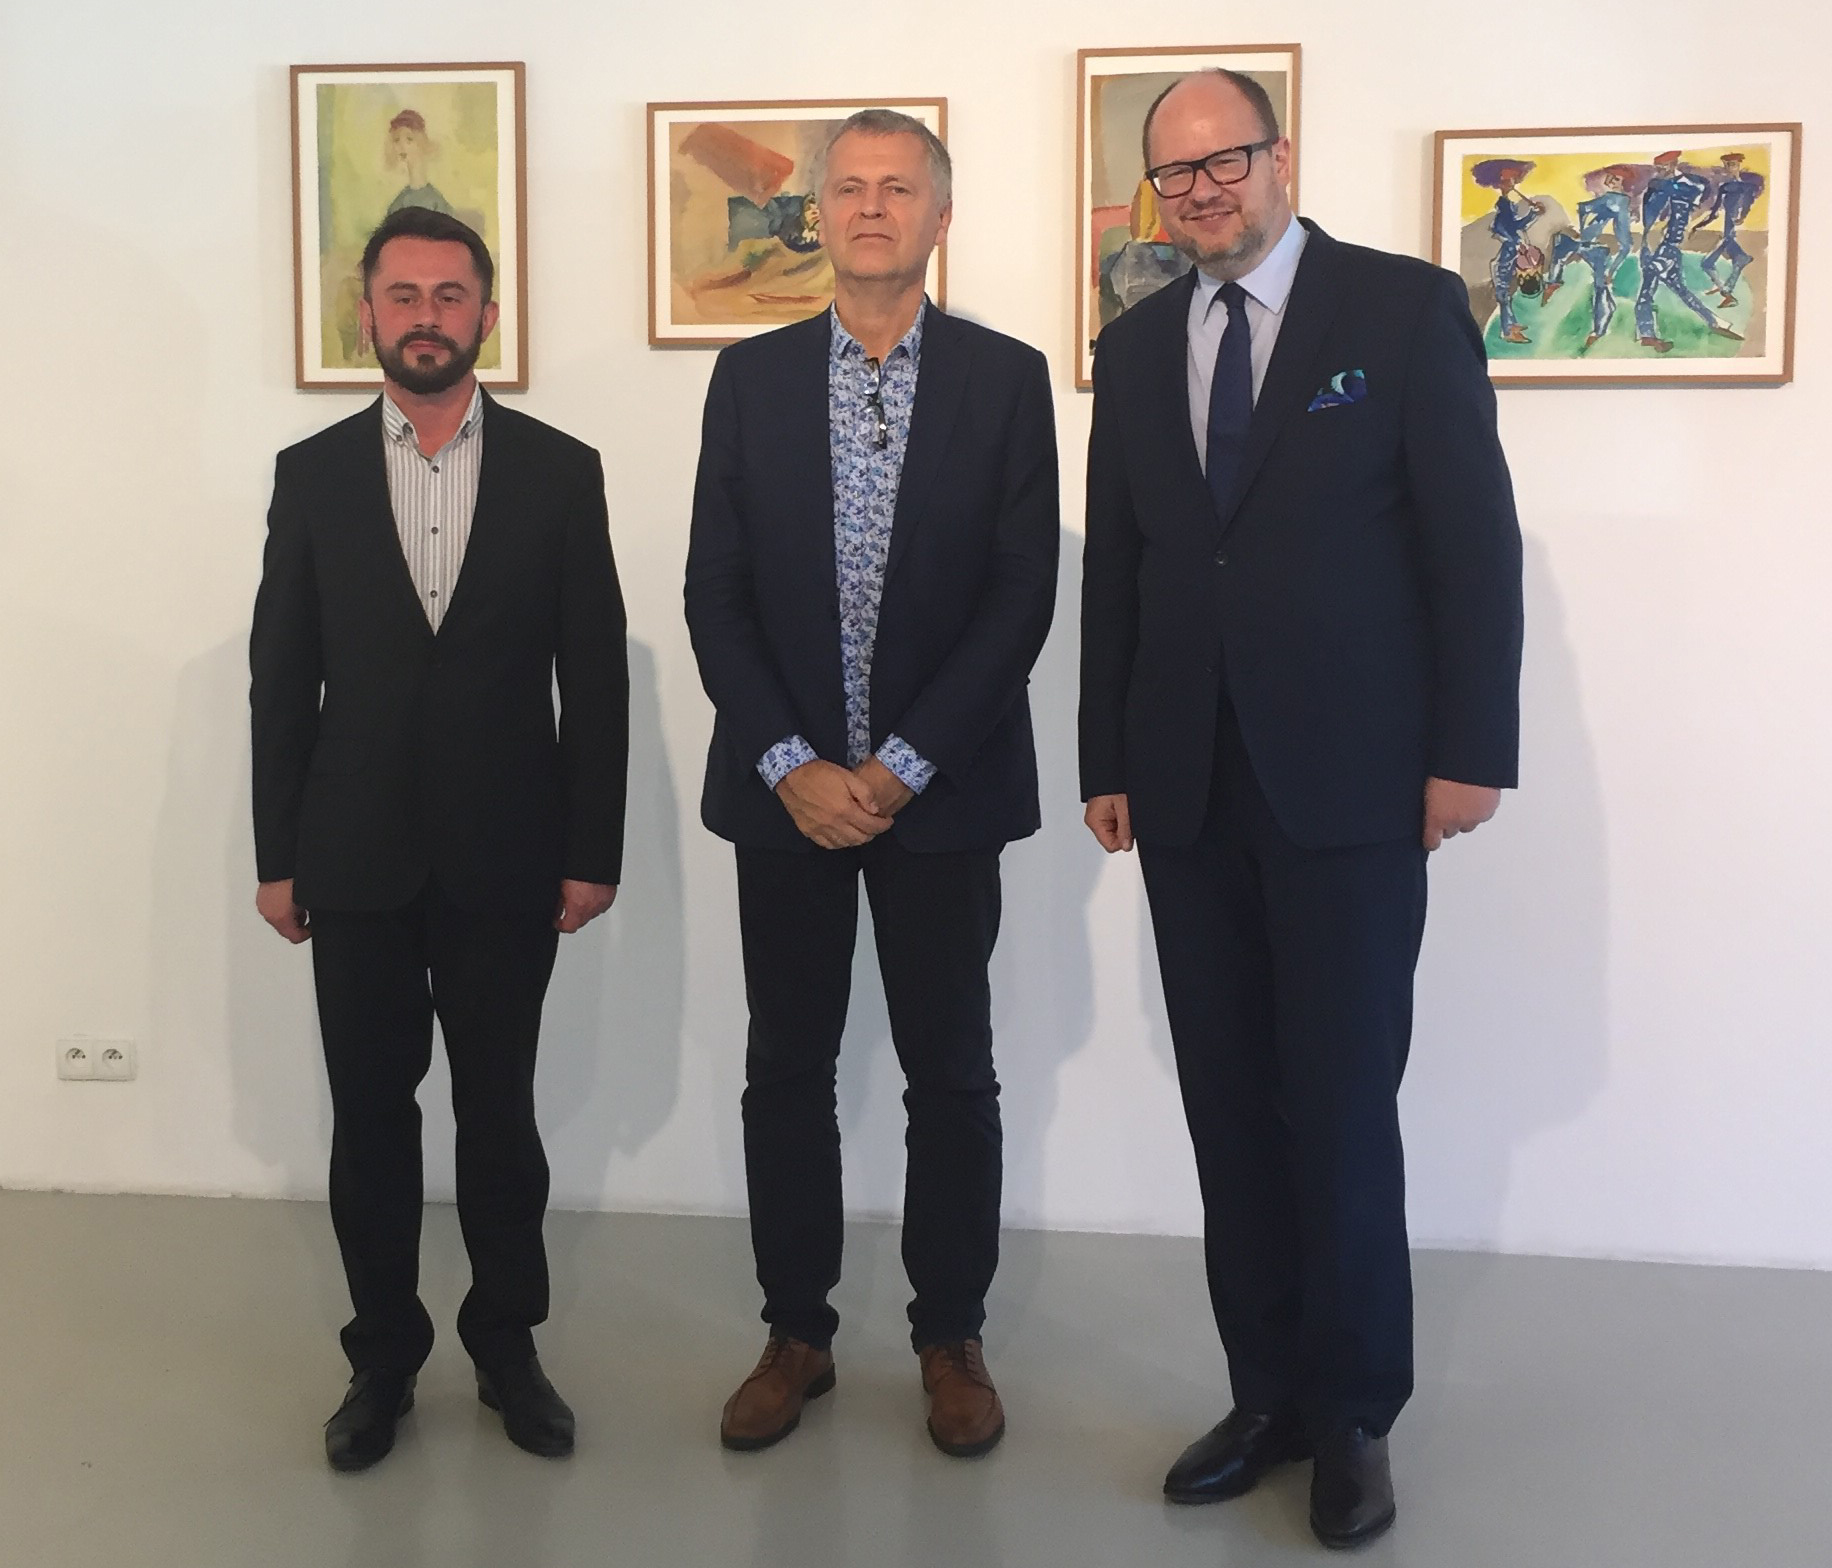 From left: Director of the Gdańsk City Gallery, Piotr Stasiowski, ICORN Director Helge Lunde and Mayor of the City of Gdańsk, Paweł Adamowicz at the Gunter Grass Gallery at Gdansk City Gallery. Photo.